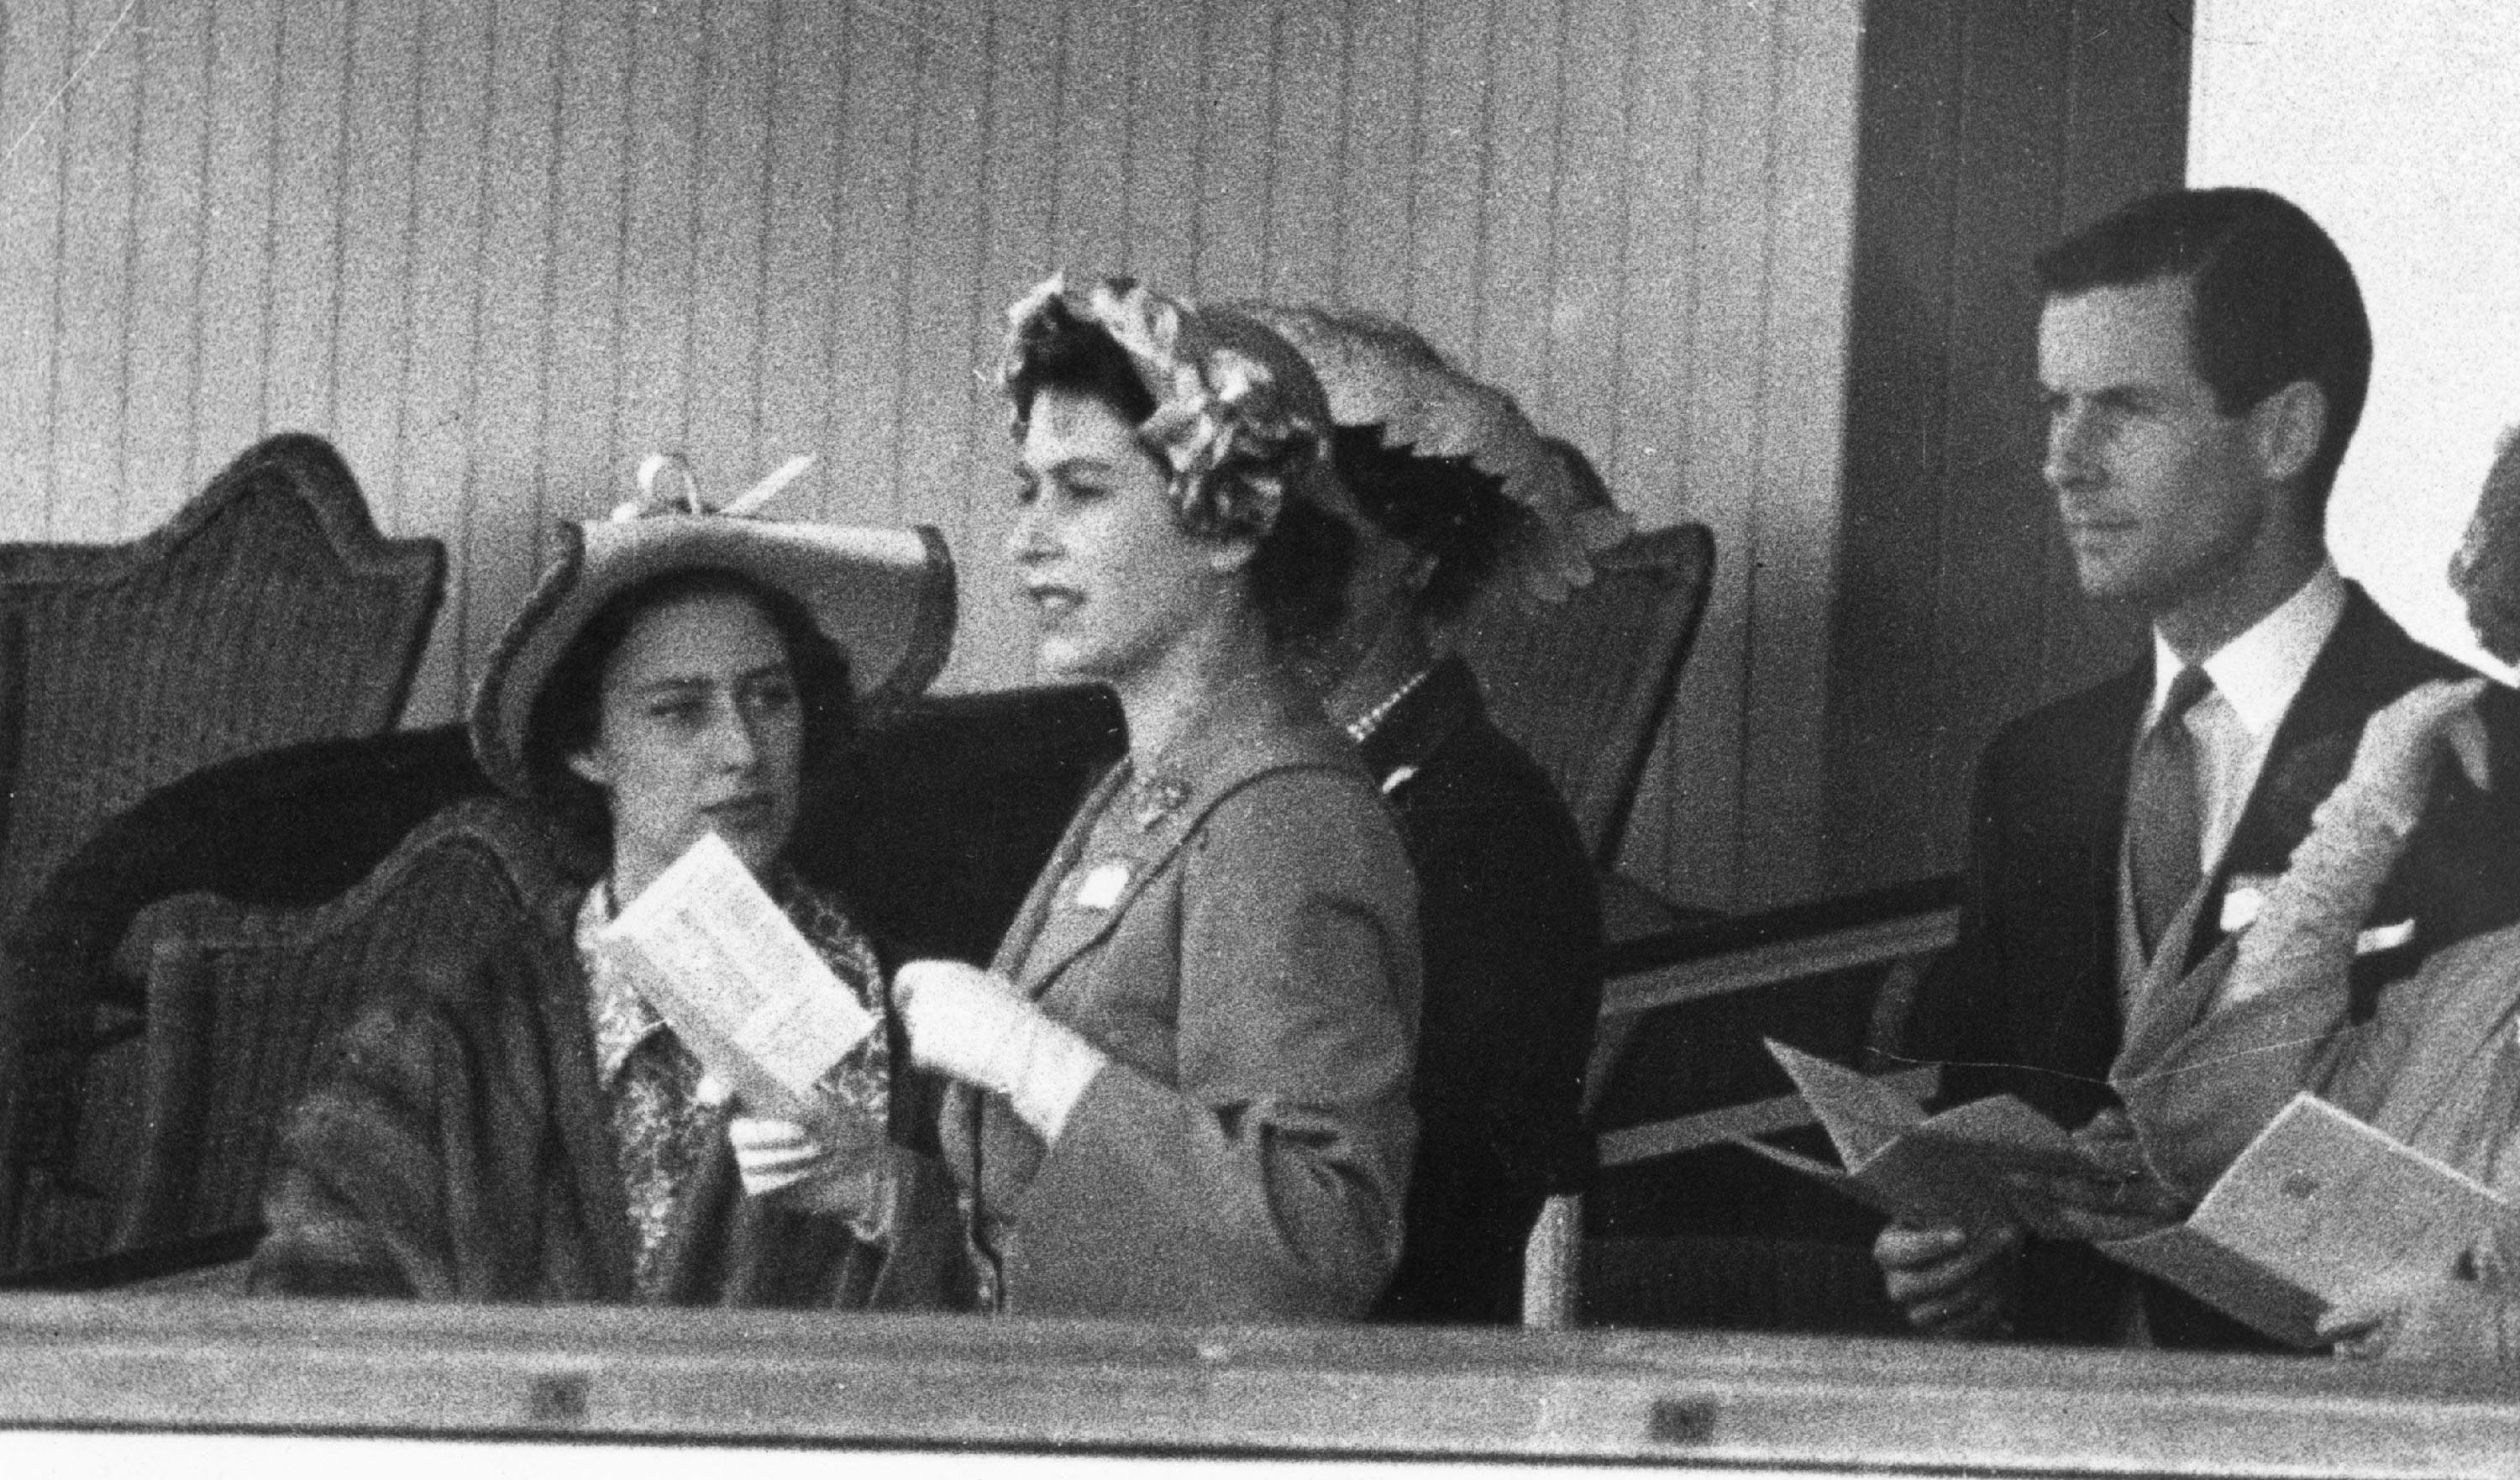 Princess Margaret, Queen Elizabeth II and Group Captain Peter Townsend gather June 13, 1951 in the Royal Box at Ascot